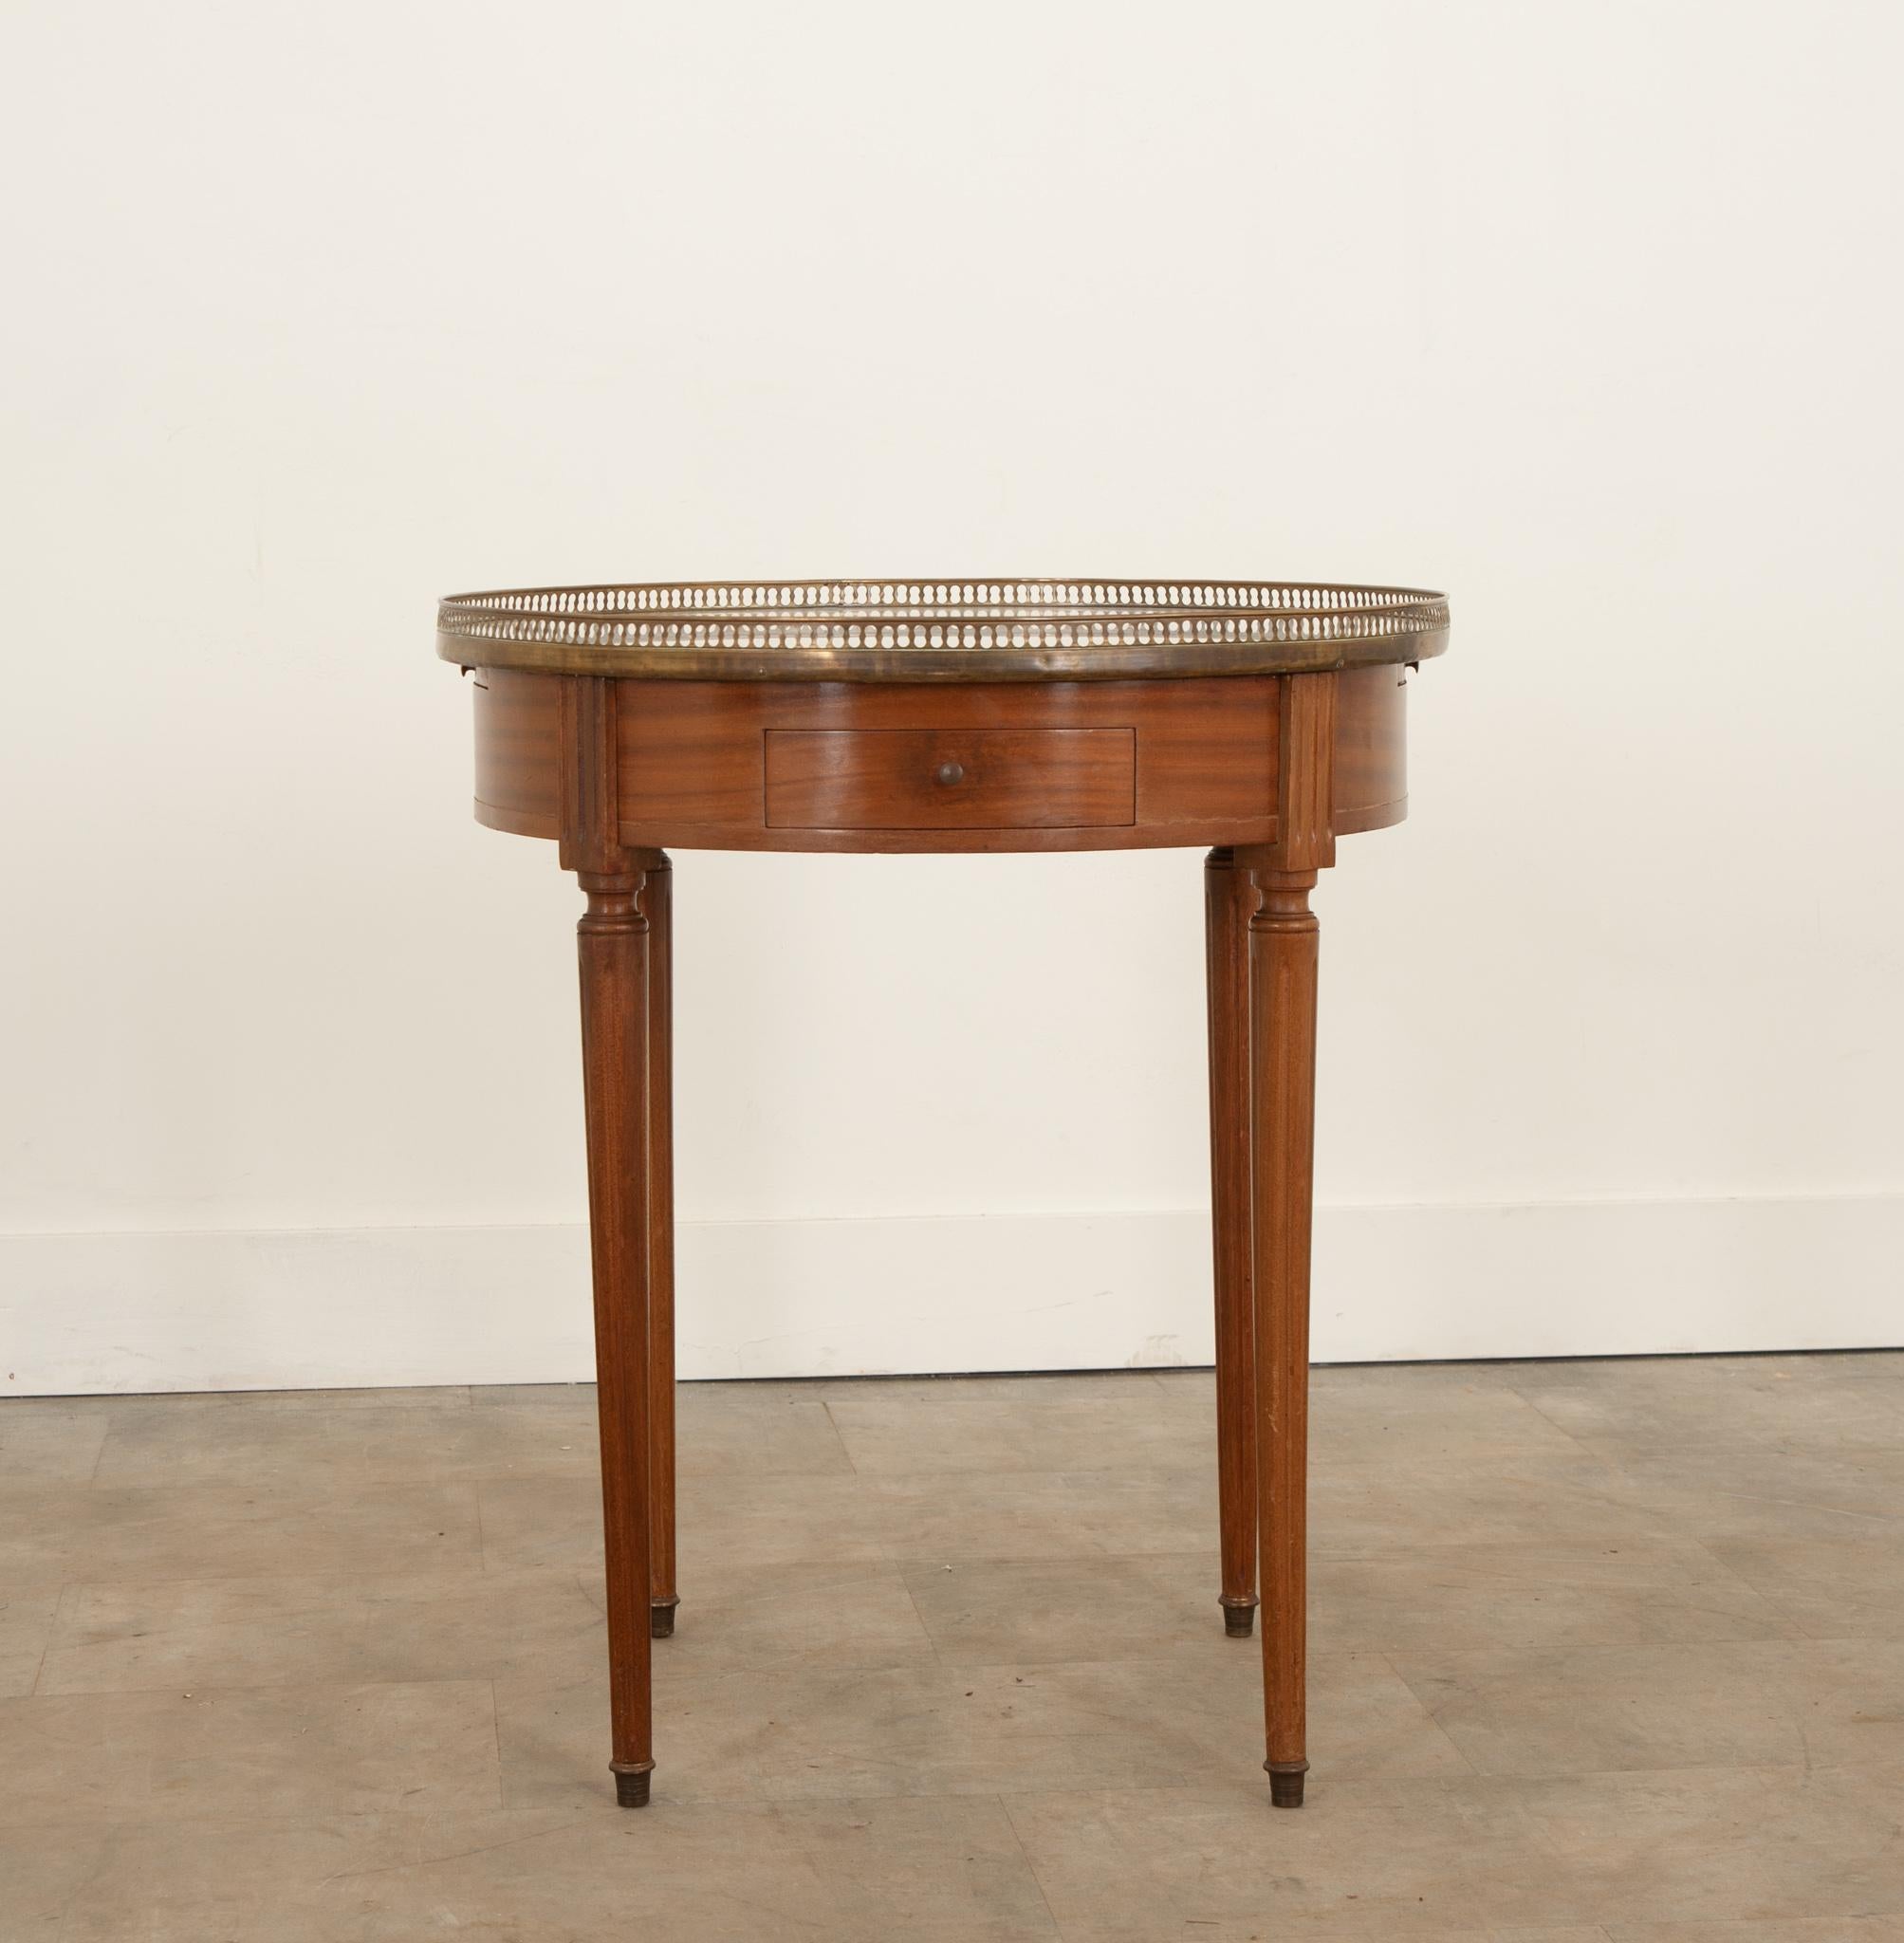 A charming French mahogany gueridon bouillotte table originally used for playing cards. Topped with white marble and surrounded by a pierced brass gallery that’s nicely patinated. Two drawers and two slides are housed within the apron, all with